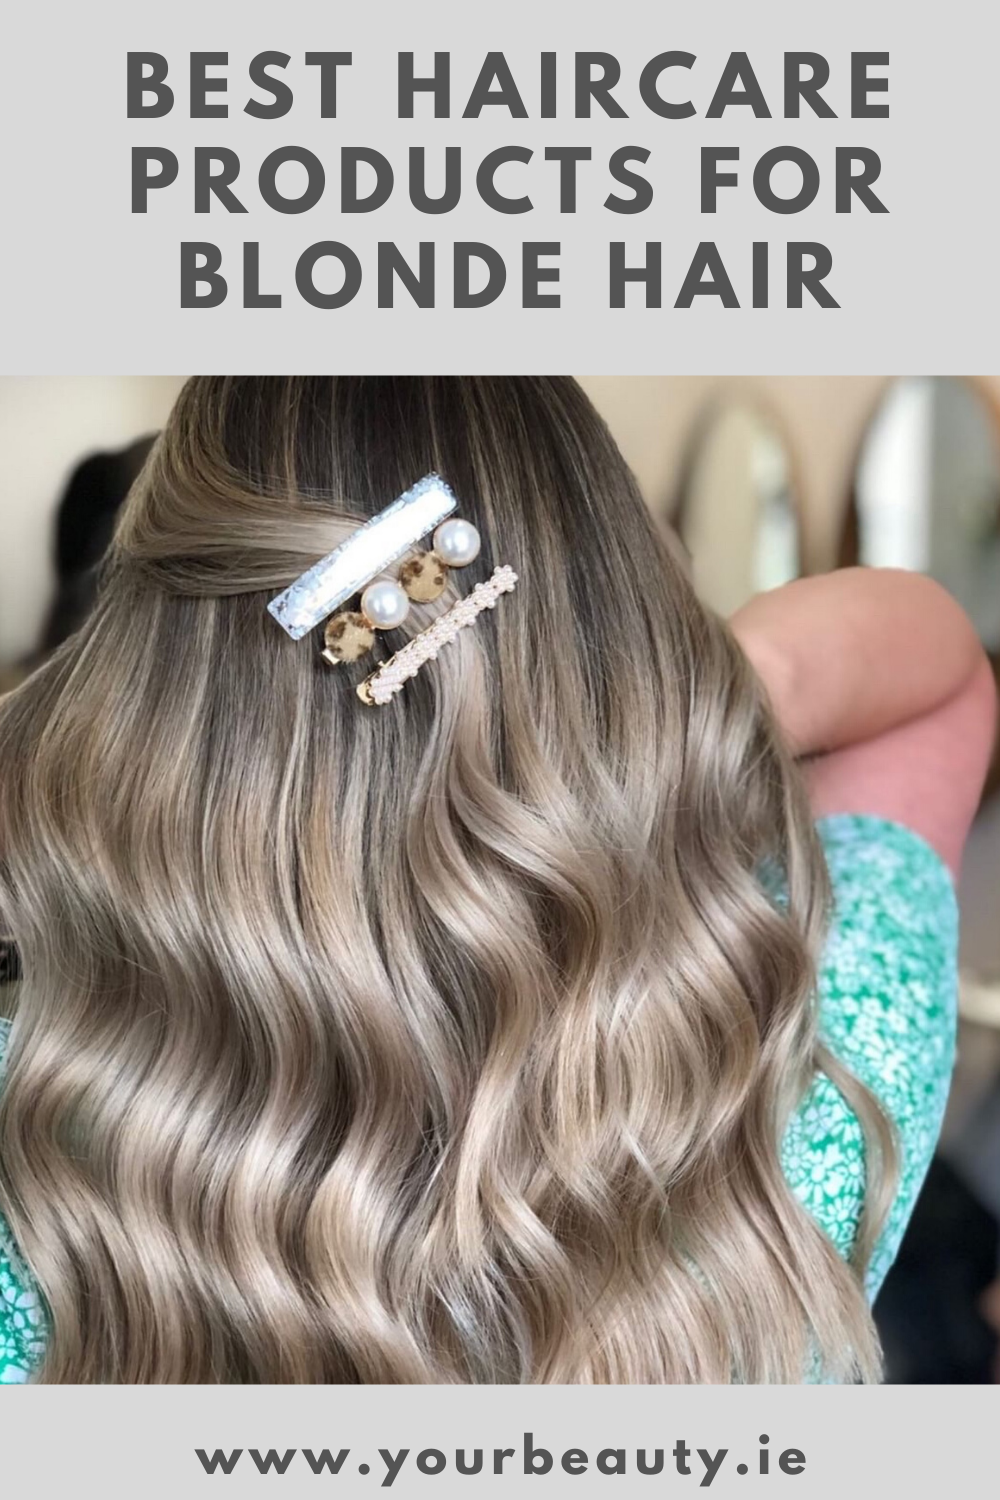 Best Haircare Products for Blonde Hair